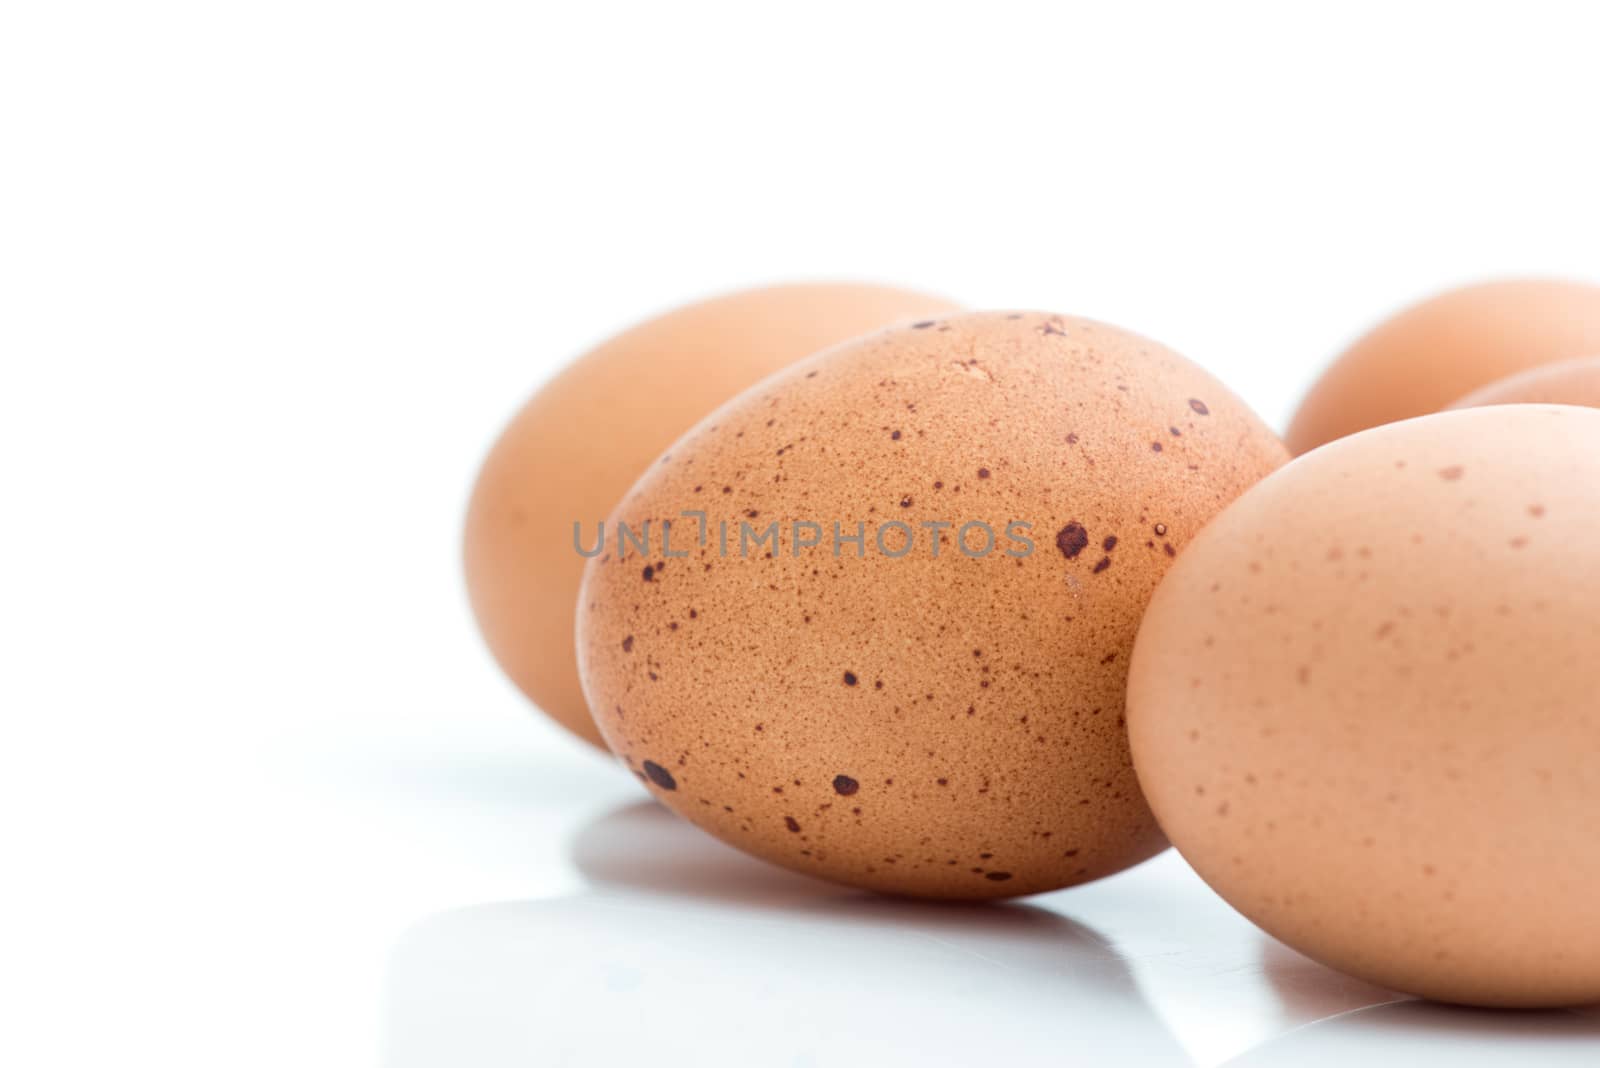 eggs on white background by antpkr